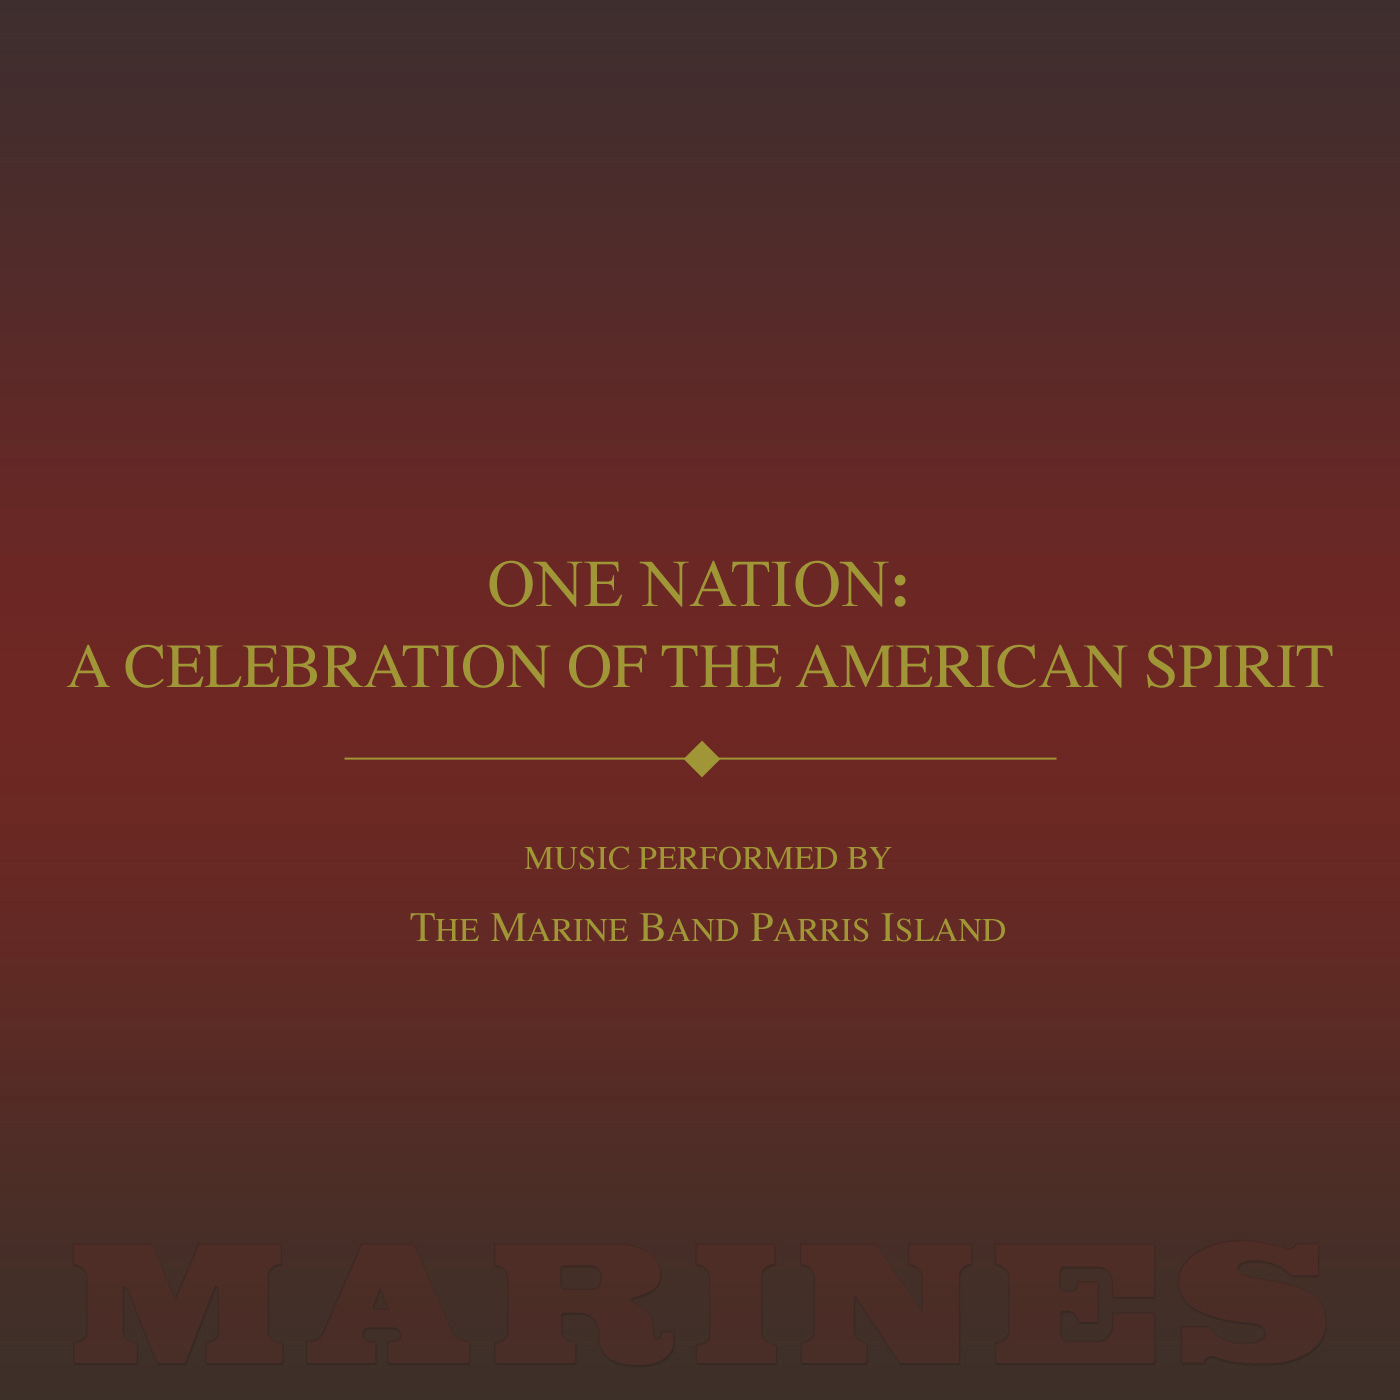 PARRIS ISLAND MARINE BAND: One Nation (A Celebration of the American Spirit)